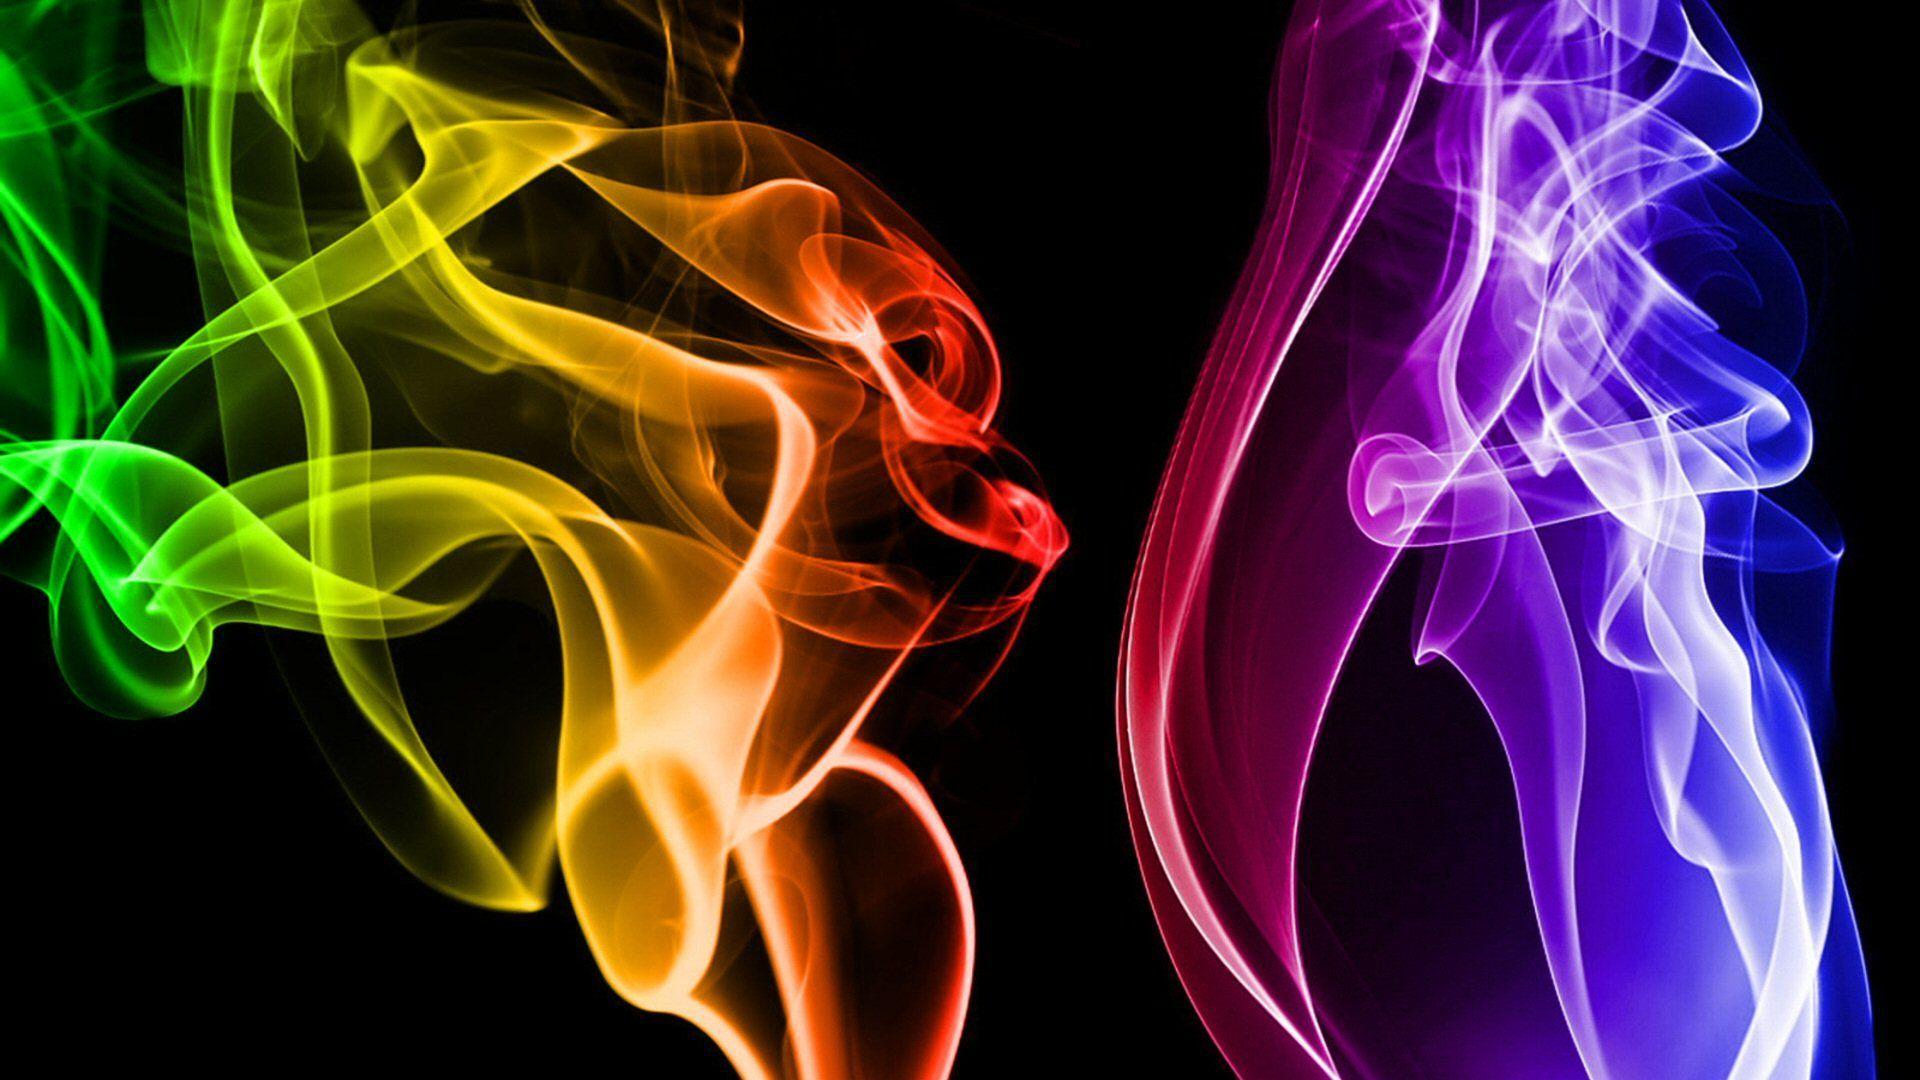 Wallpaper For > Colorful Smoke Background